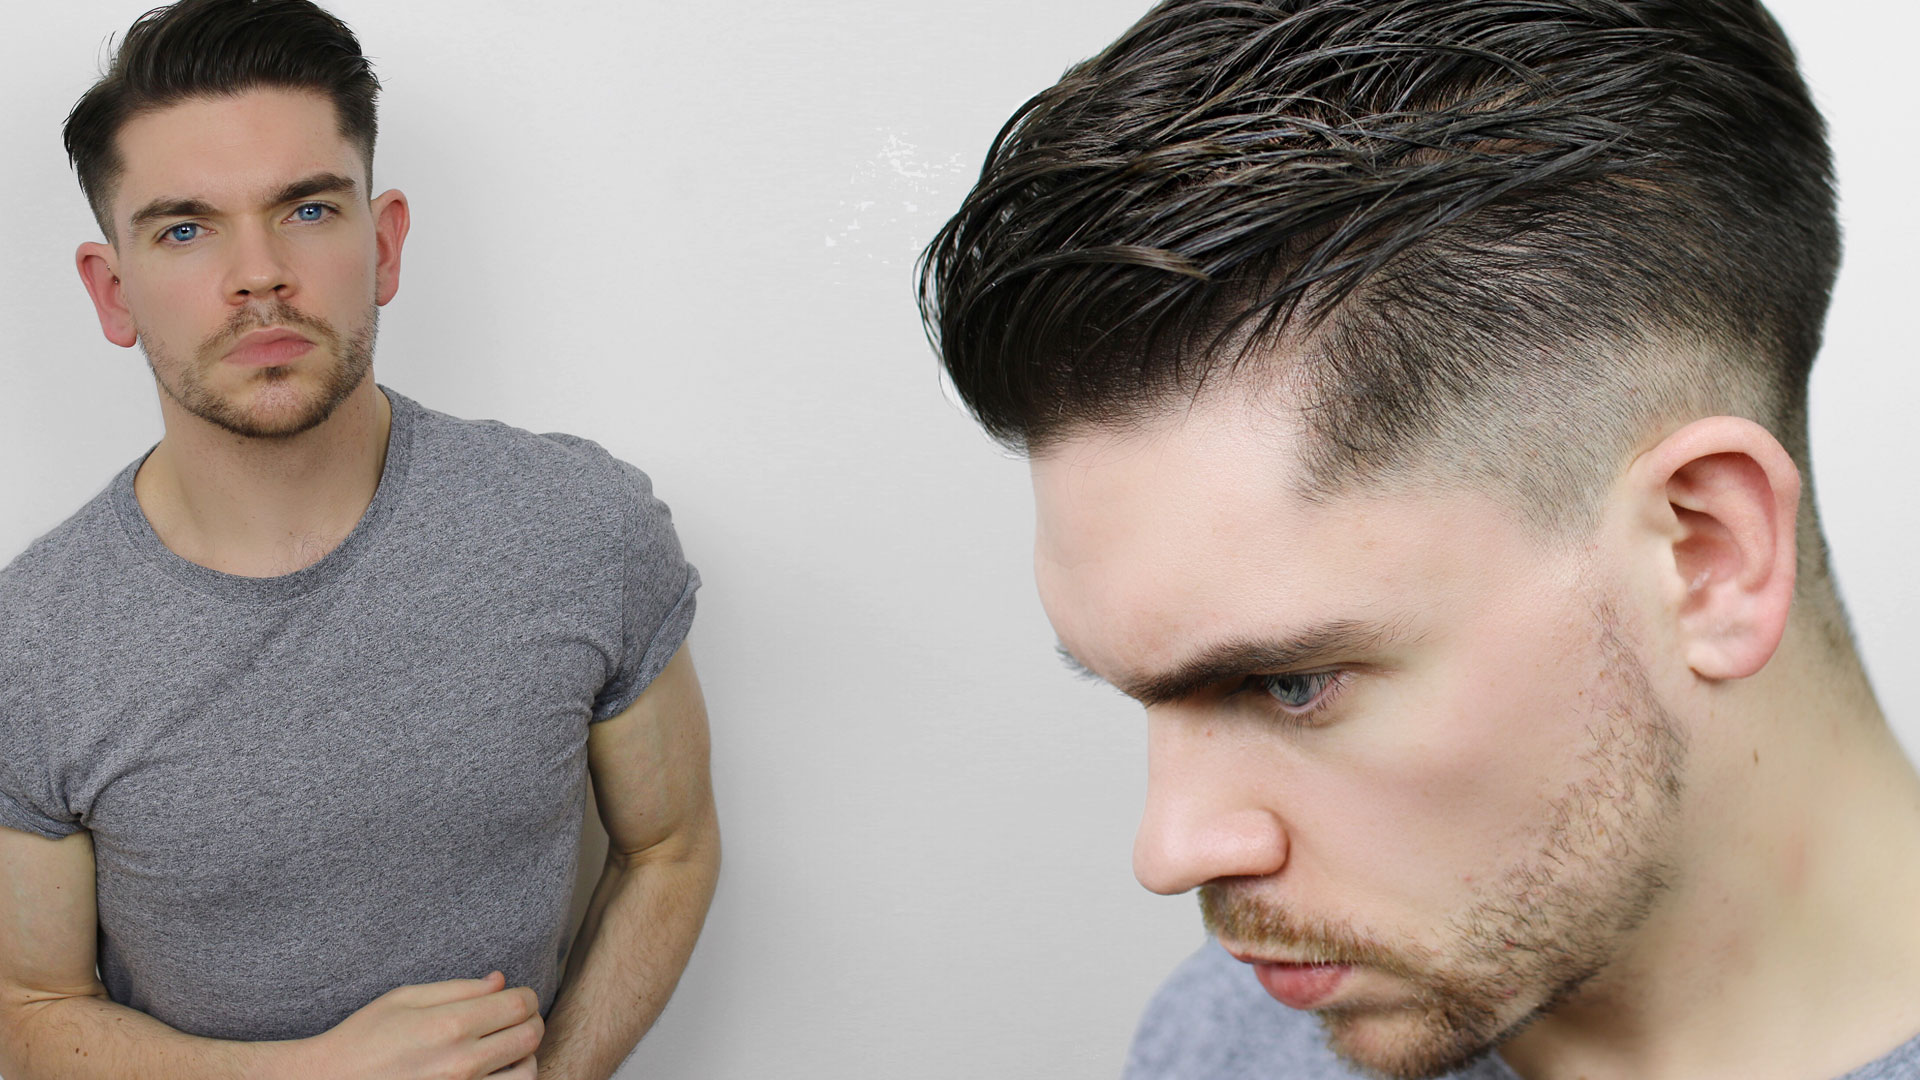 Hair Republic Mandalay - Slicked Back Undercut Hairstyle For Men The  slicked back undercut hairstyle is a trendy mix of classic and modern  styles. It works best with medium-length hair, and styling